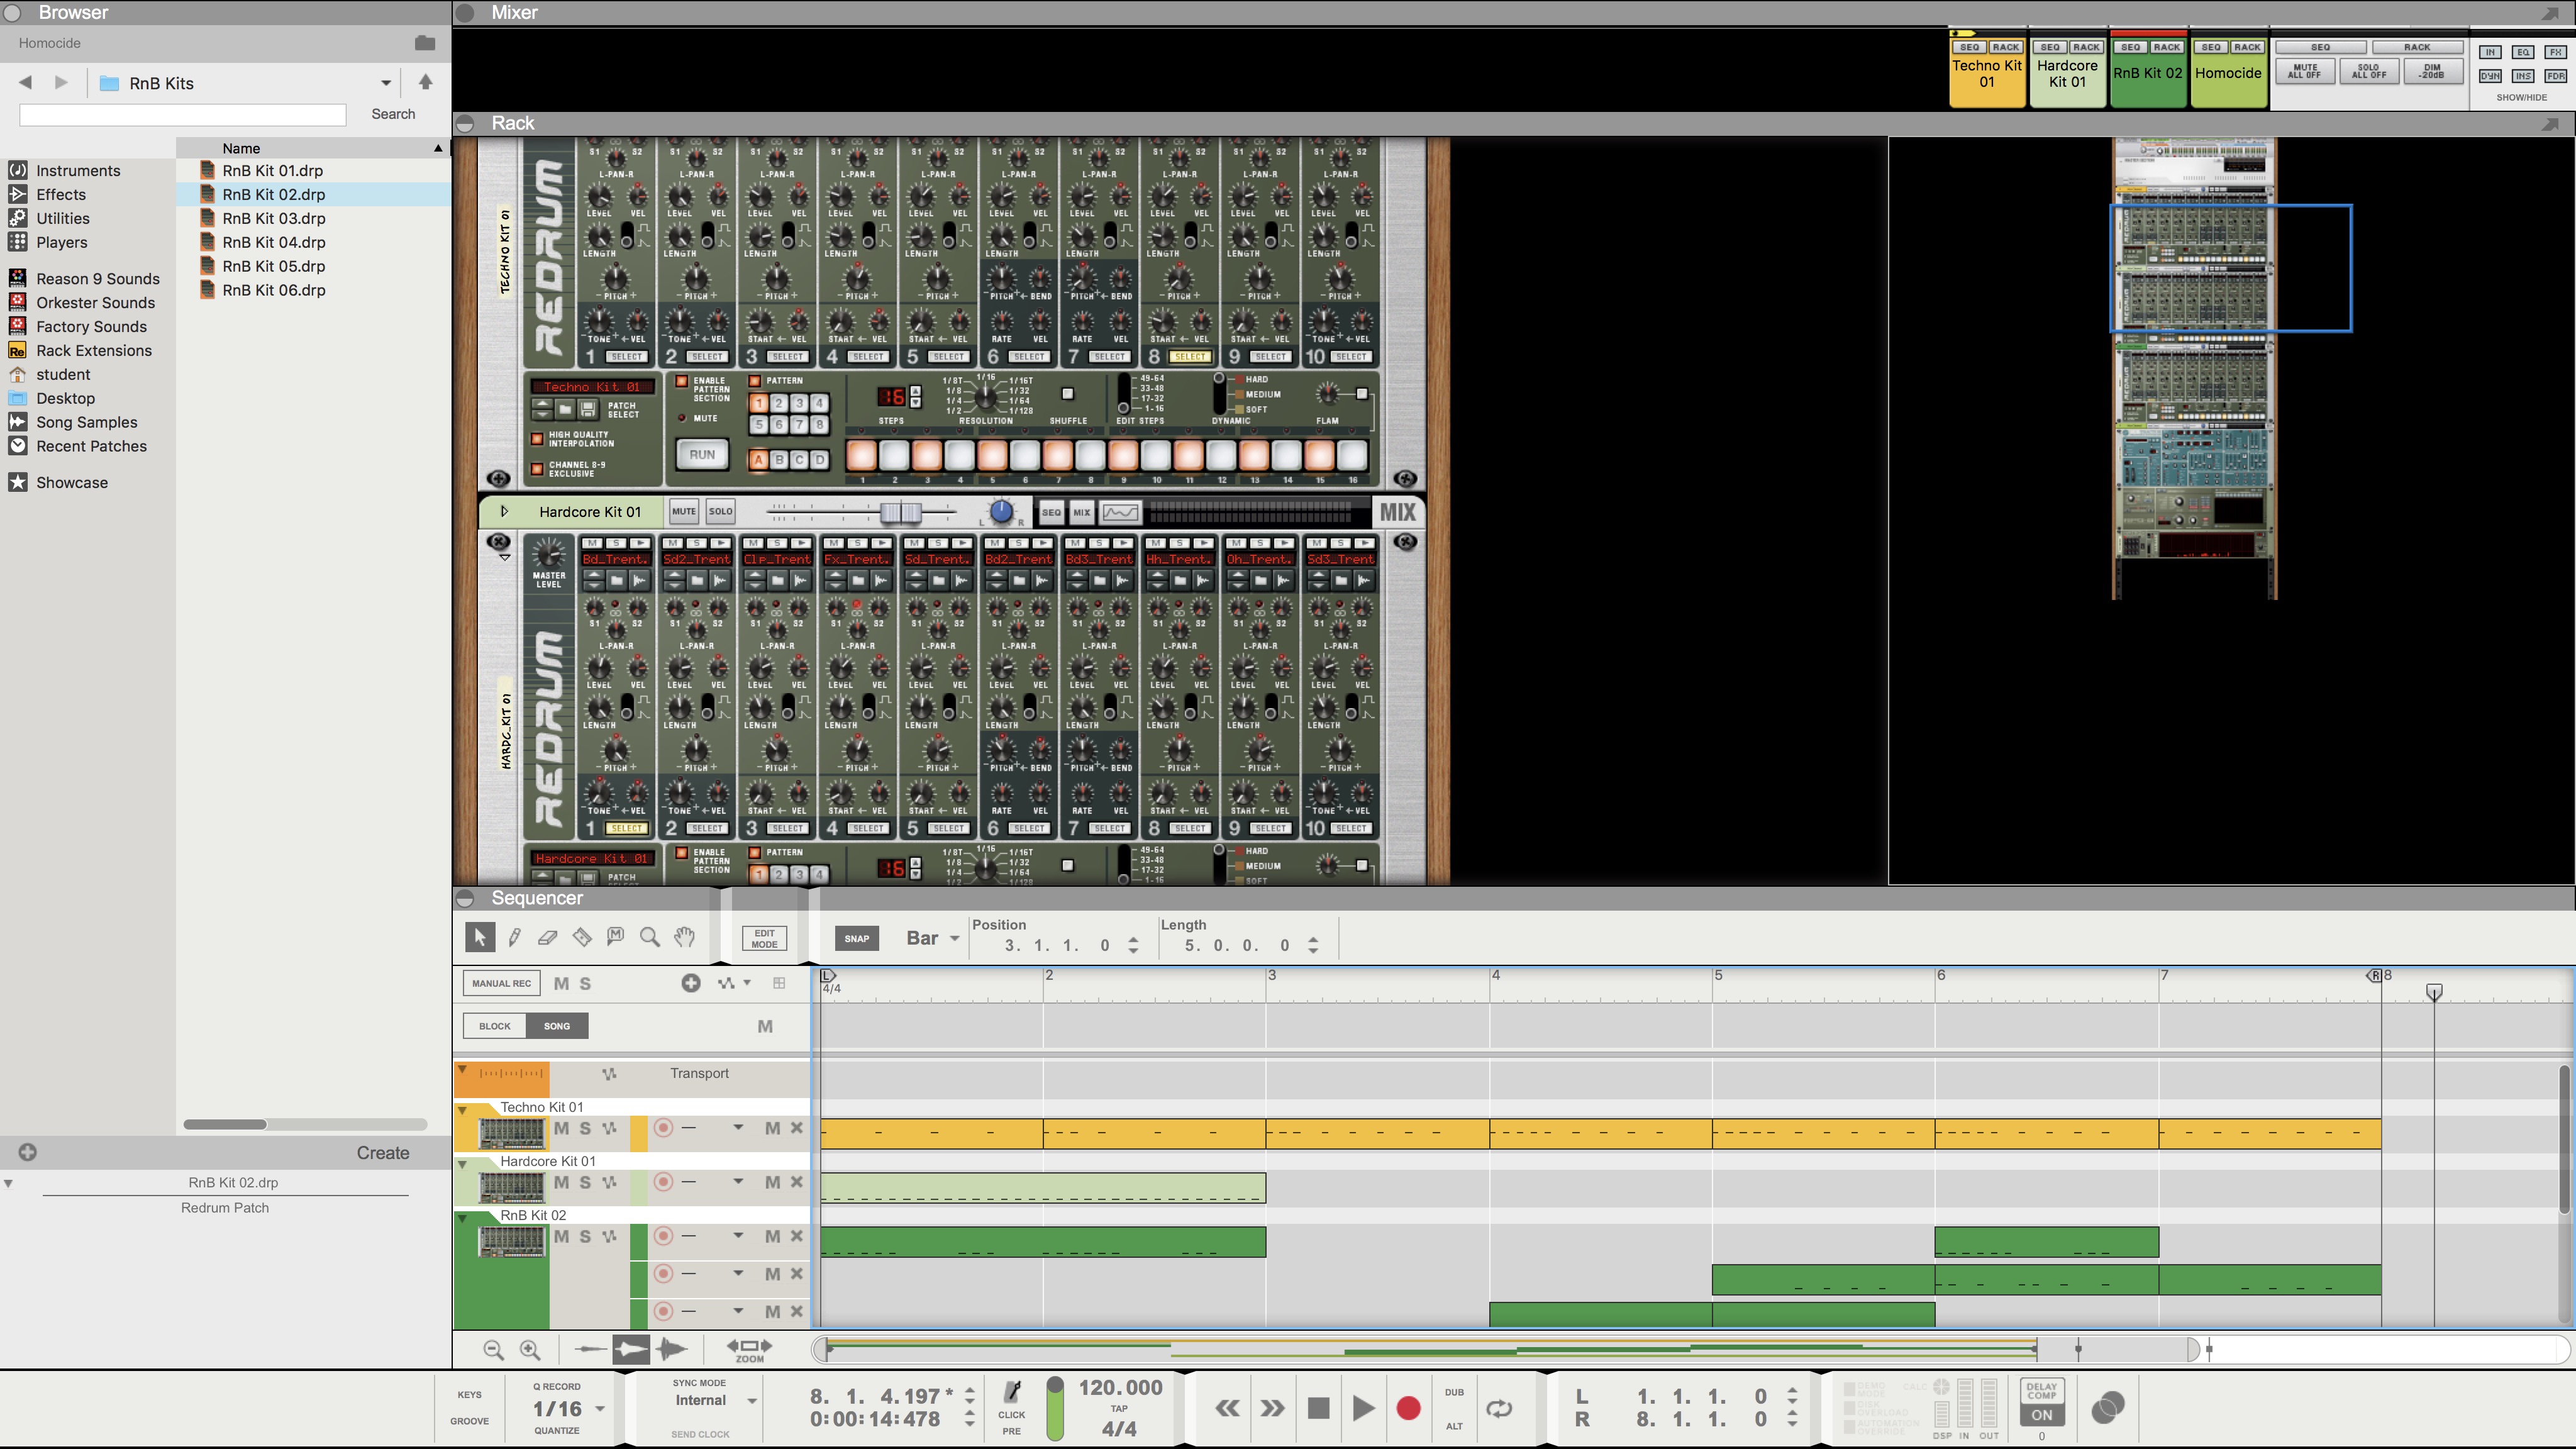 This is a screenshot of my music production in Reason 9.